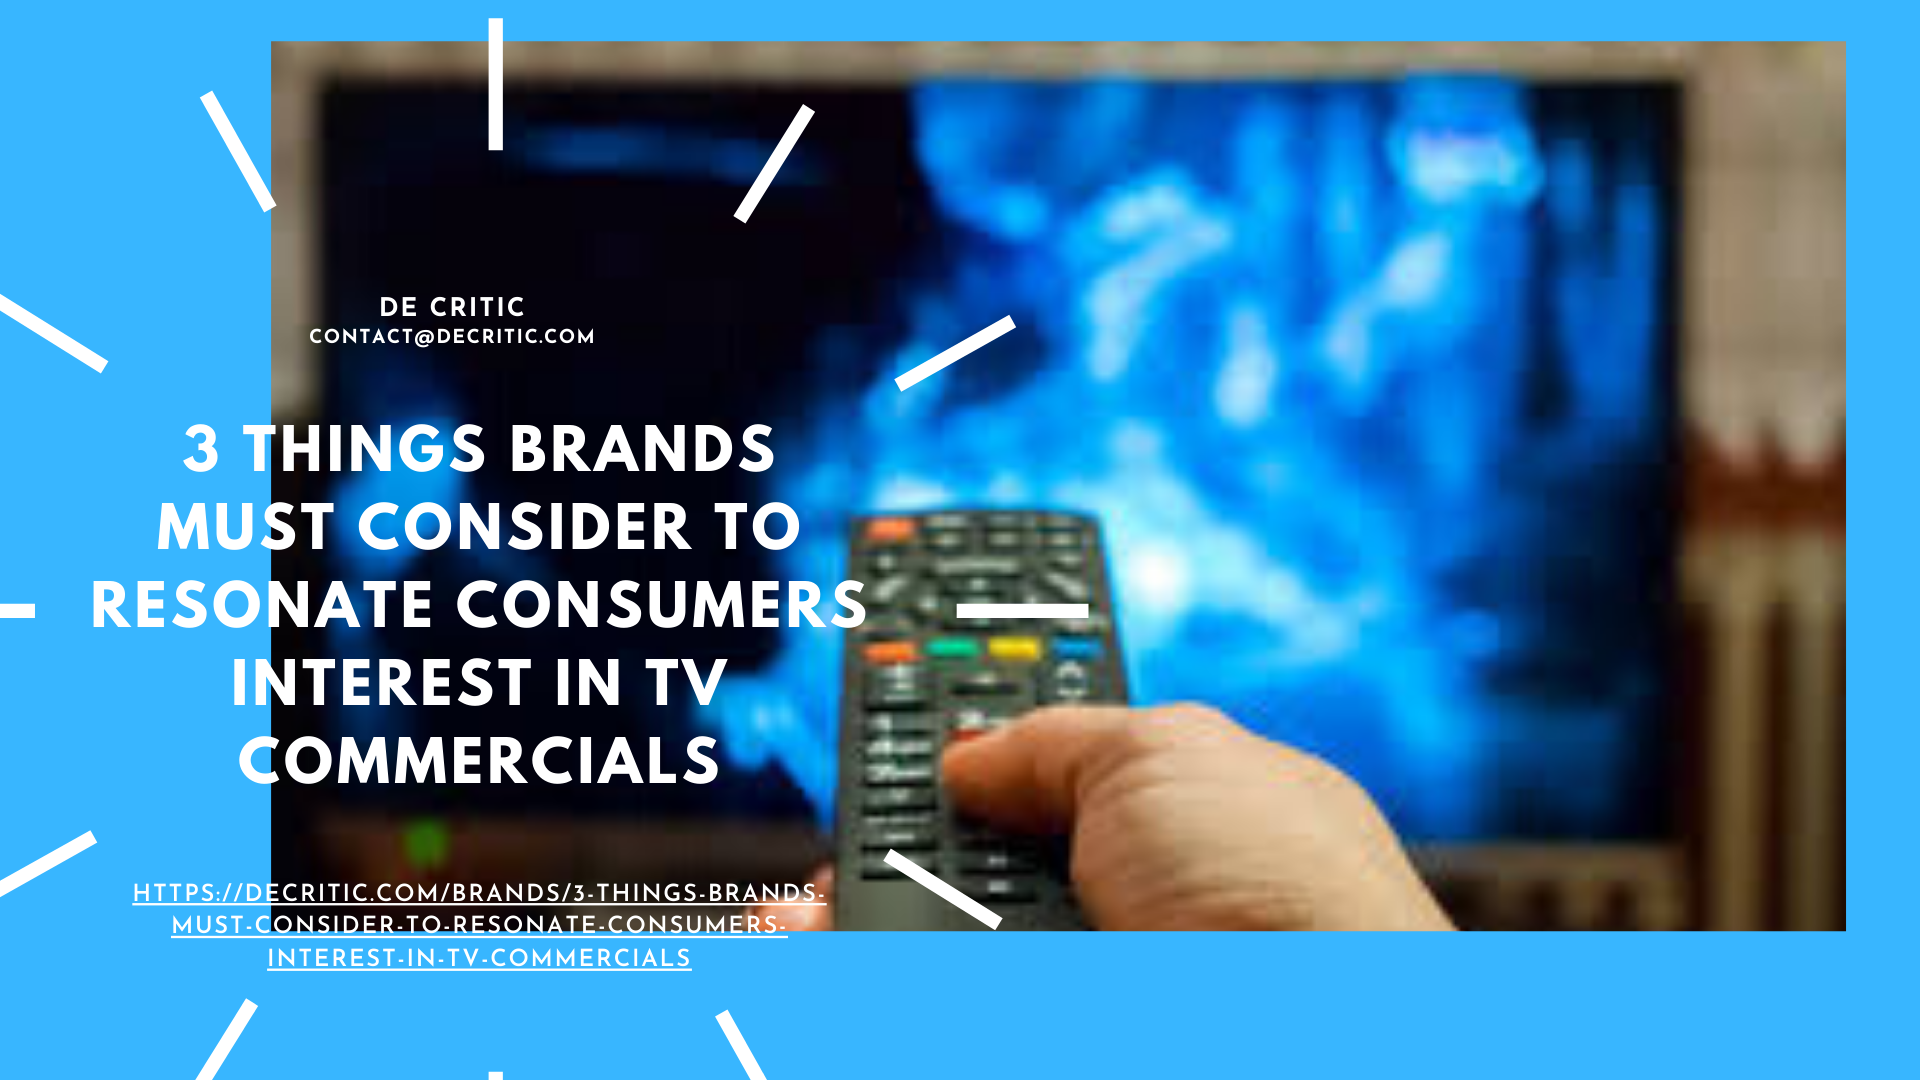 3things brands must consider to resonate consumers interest in TV commercials